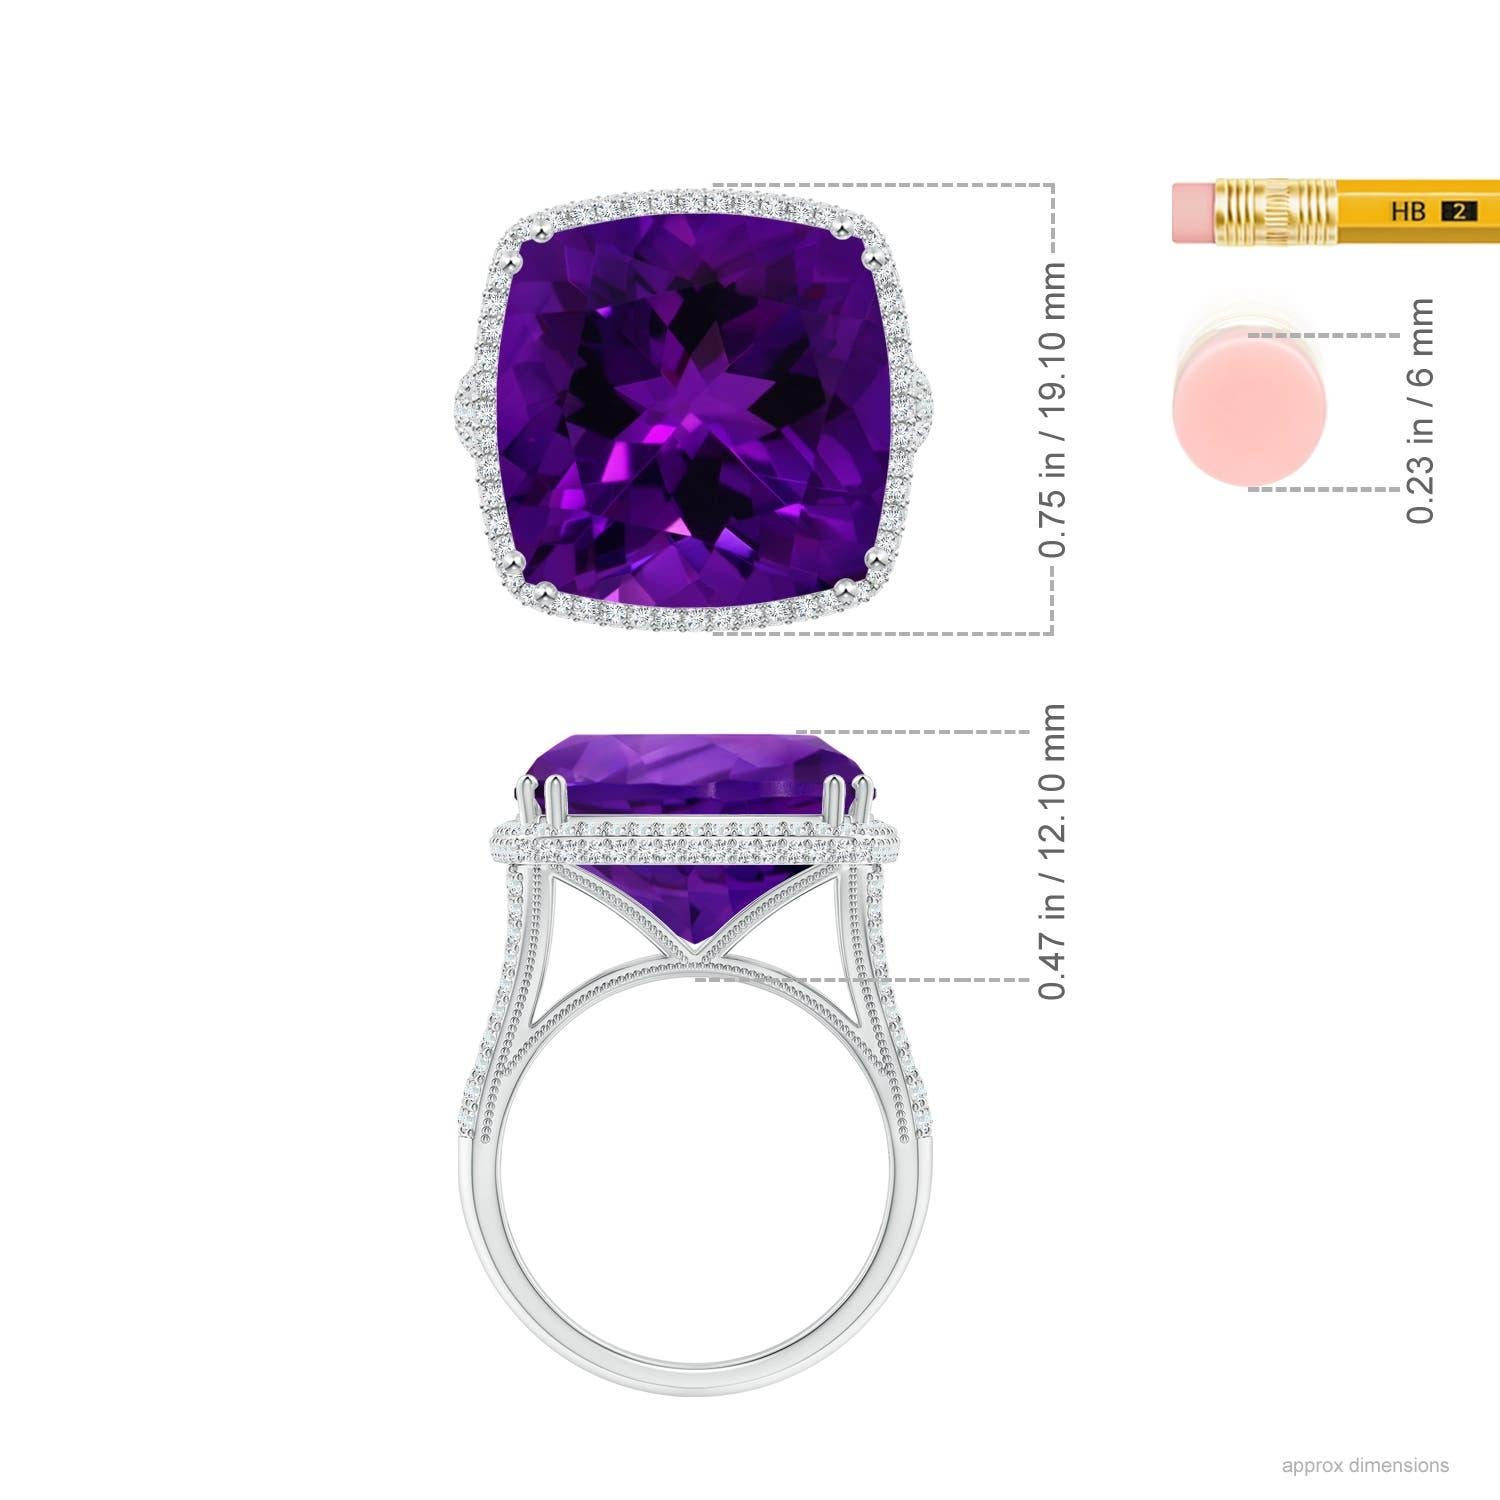 For Sale:  Angara Gia Certified Natural Amethyst Ring in White Gold with Diamond Halo 5